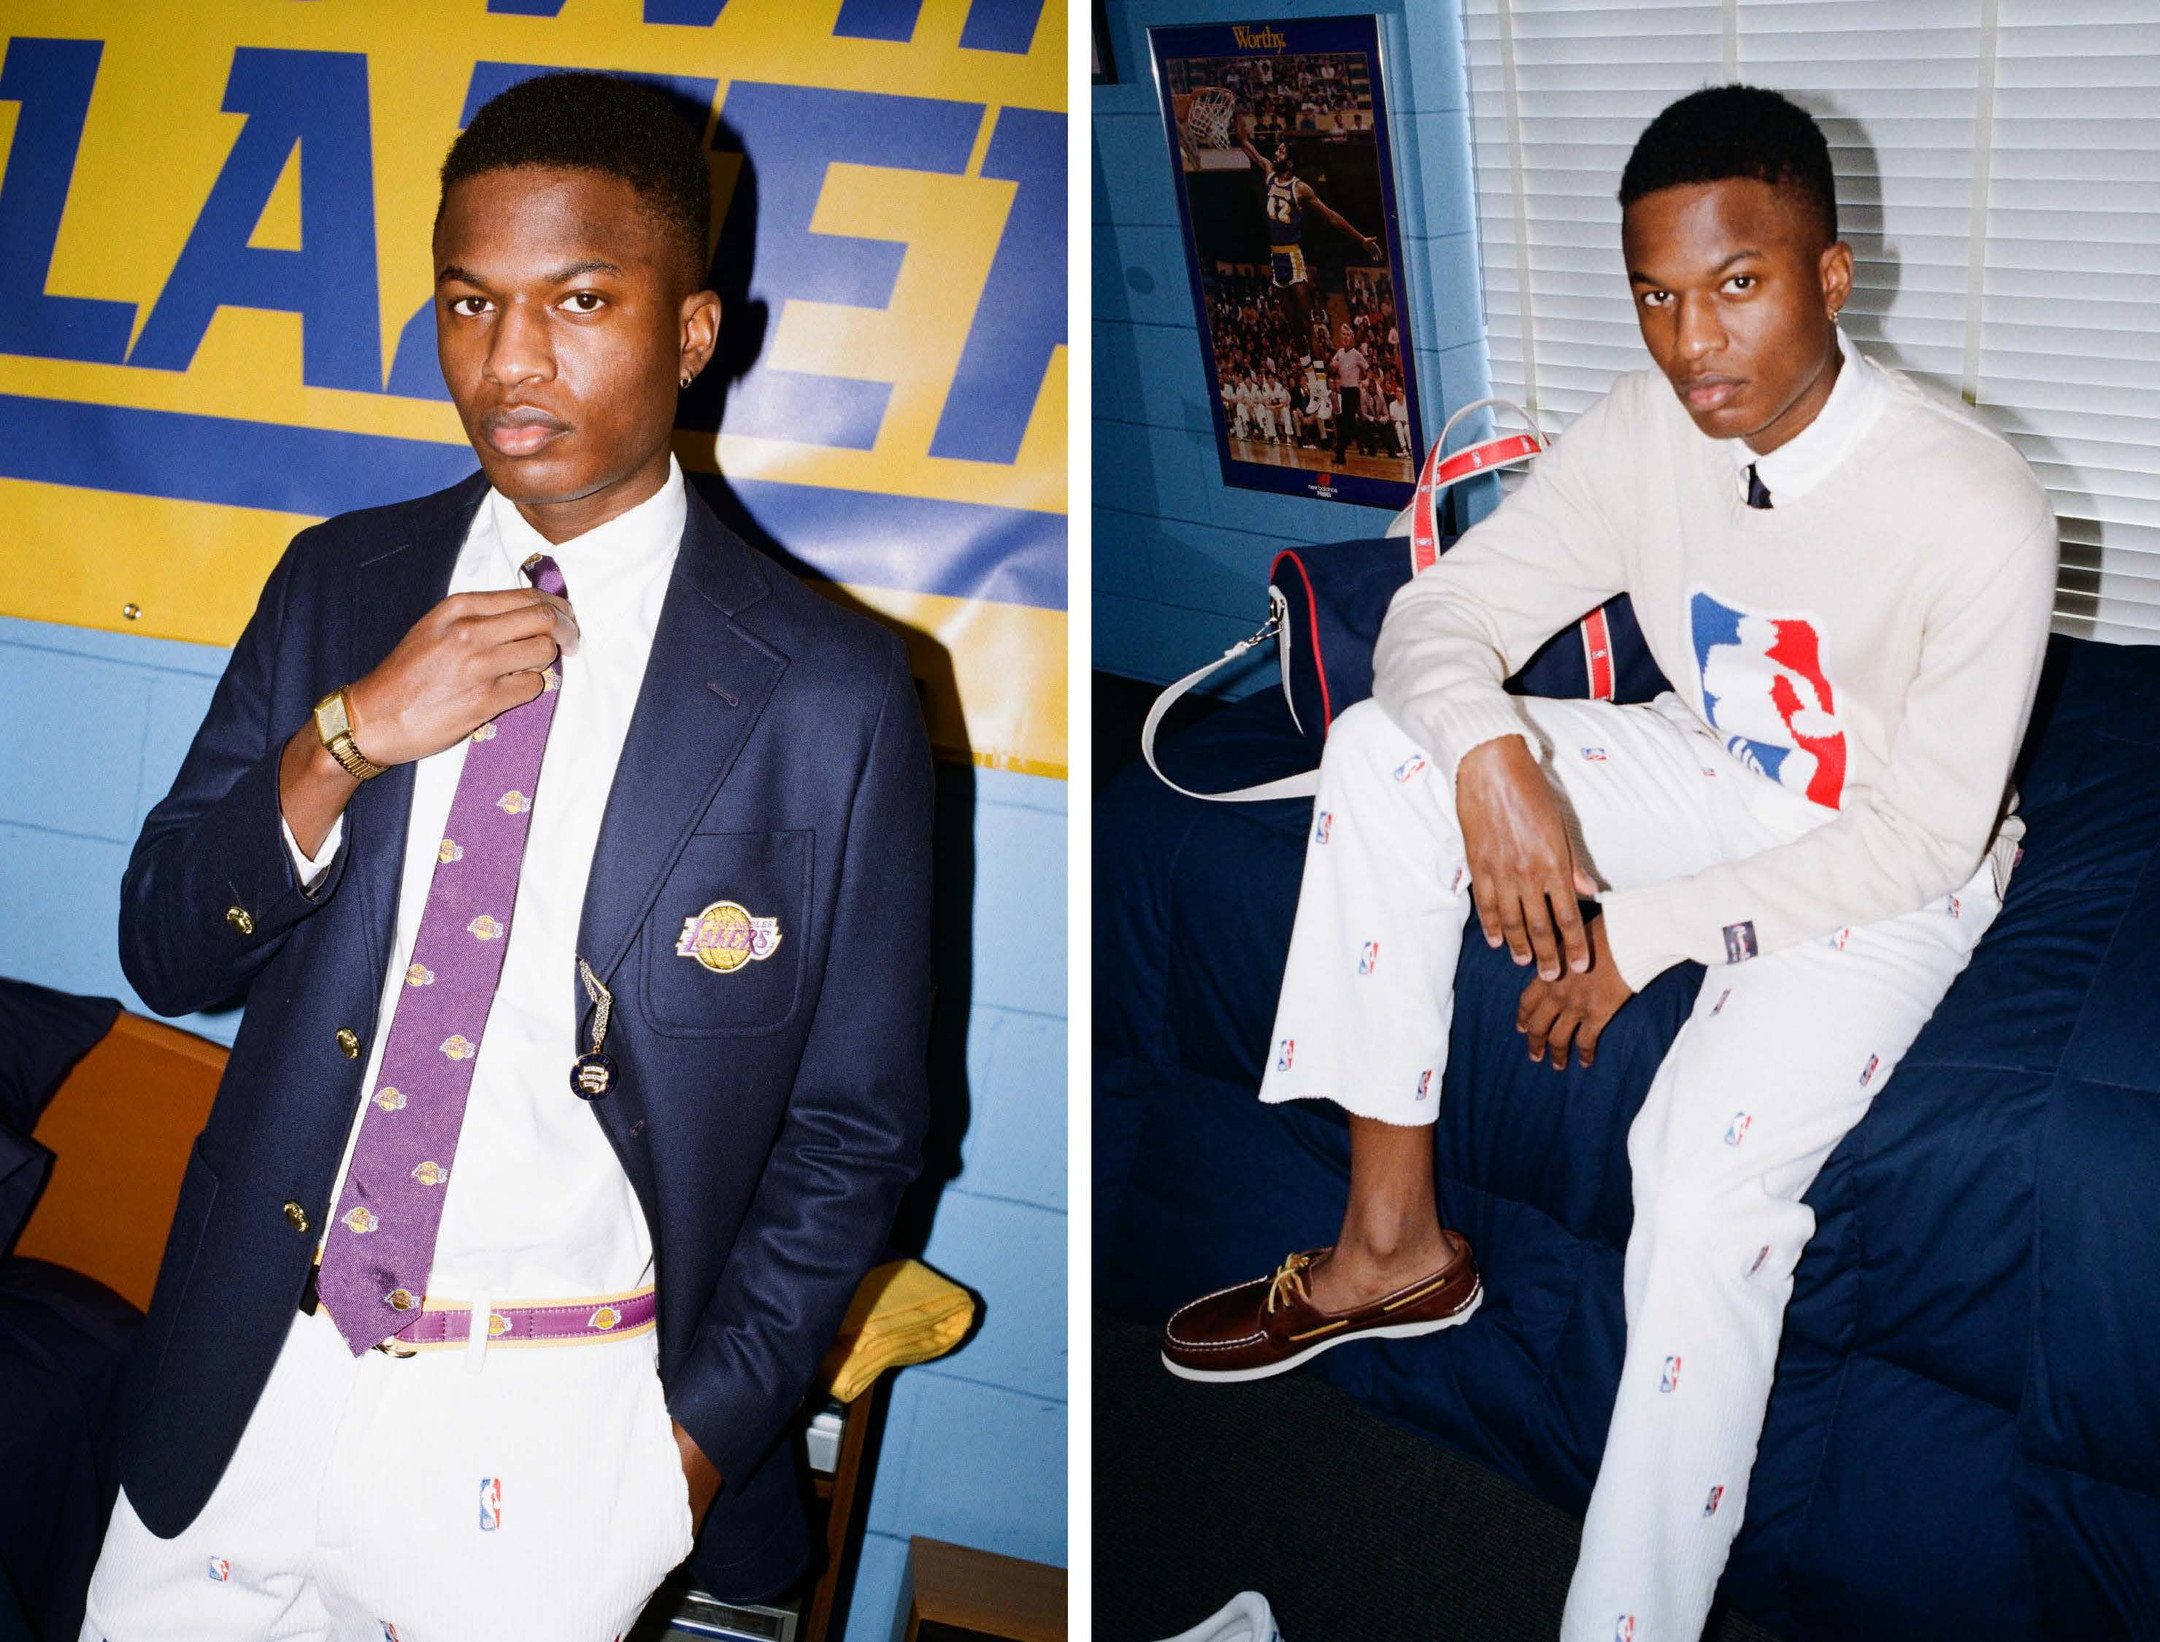 Model wearing the Los Angeles Lakers Tie, Blazer, and Belt. The same model wearing the NBA logo Sweater in Cream.